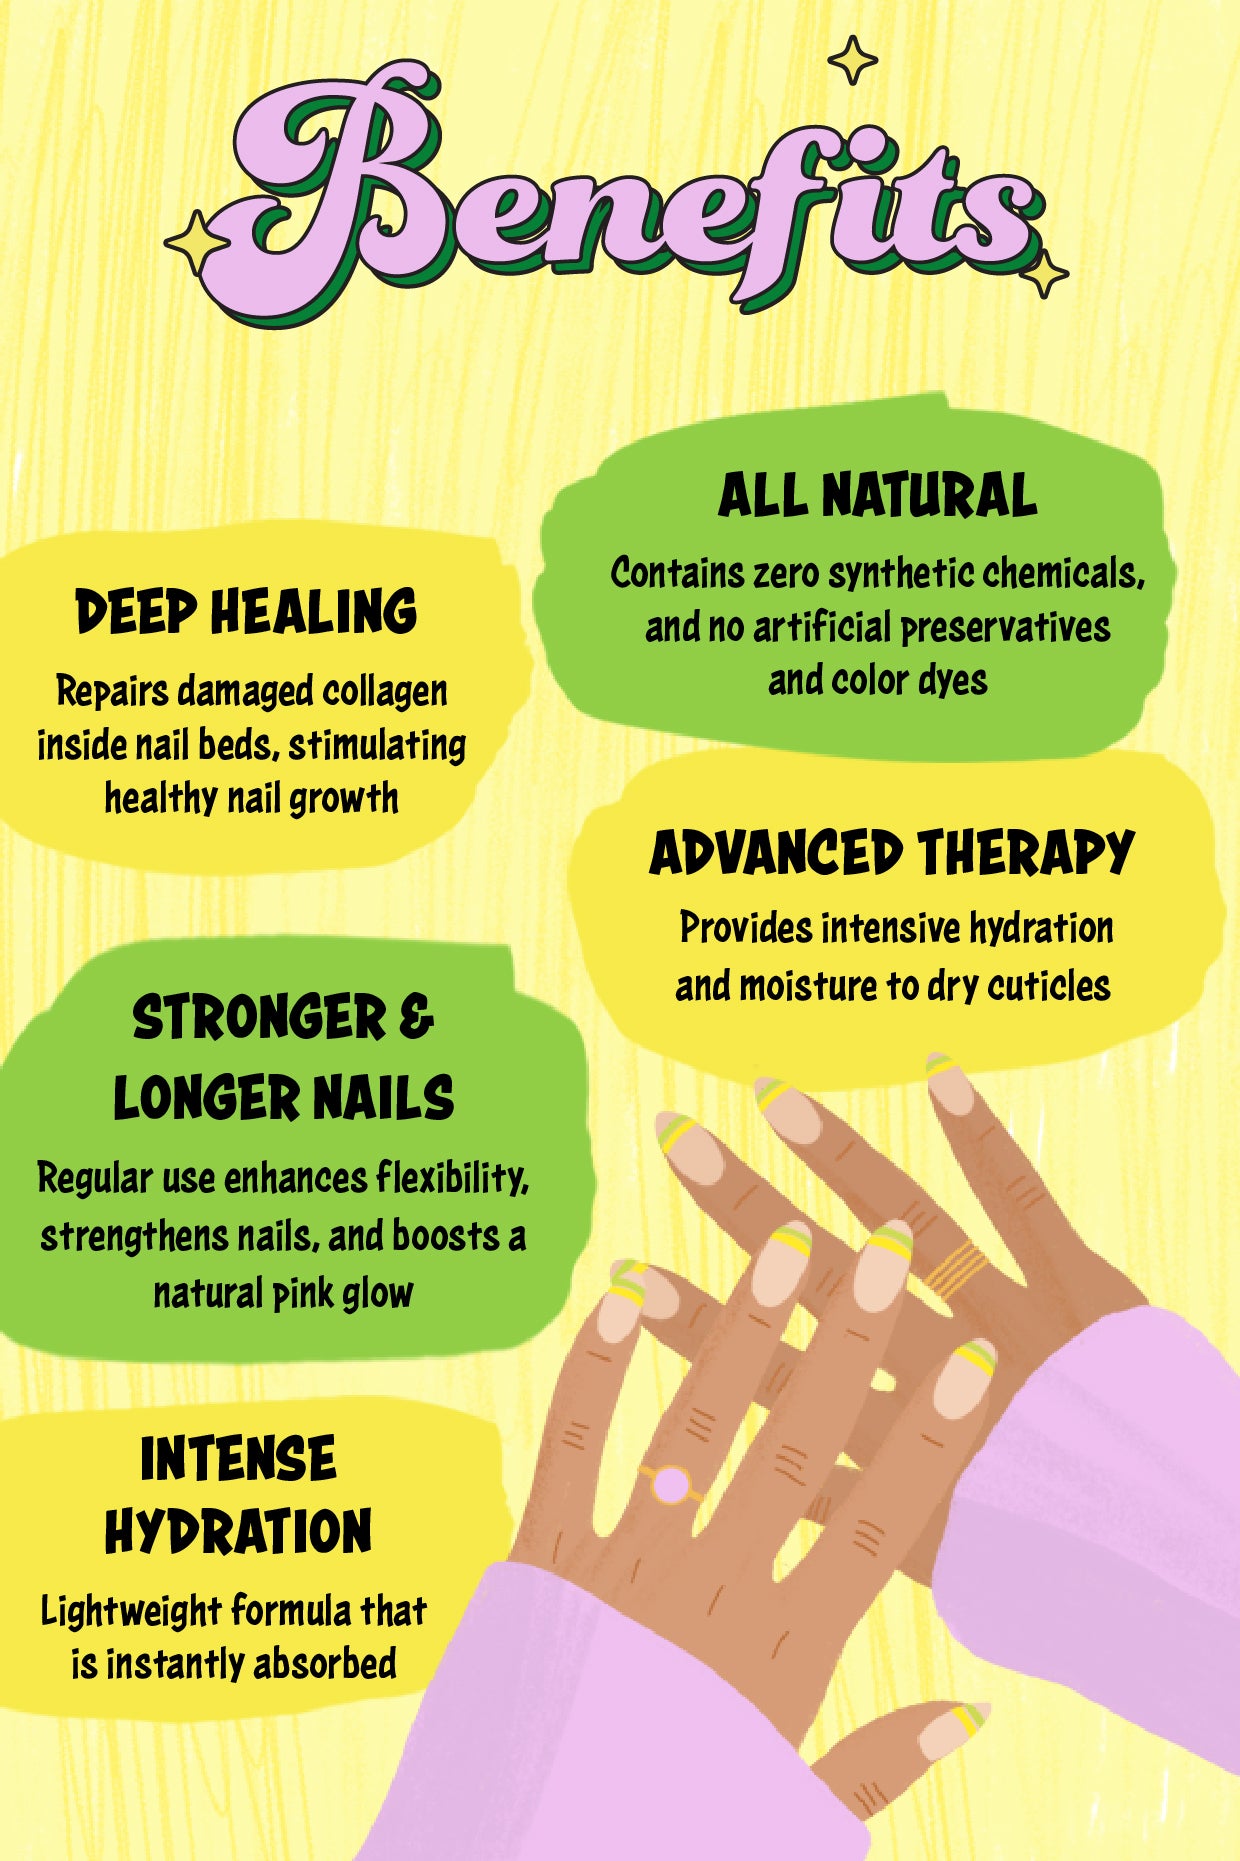 Uses of olive oil for nail care - Olive Oils from Spain